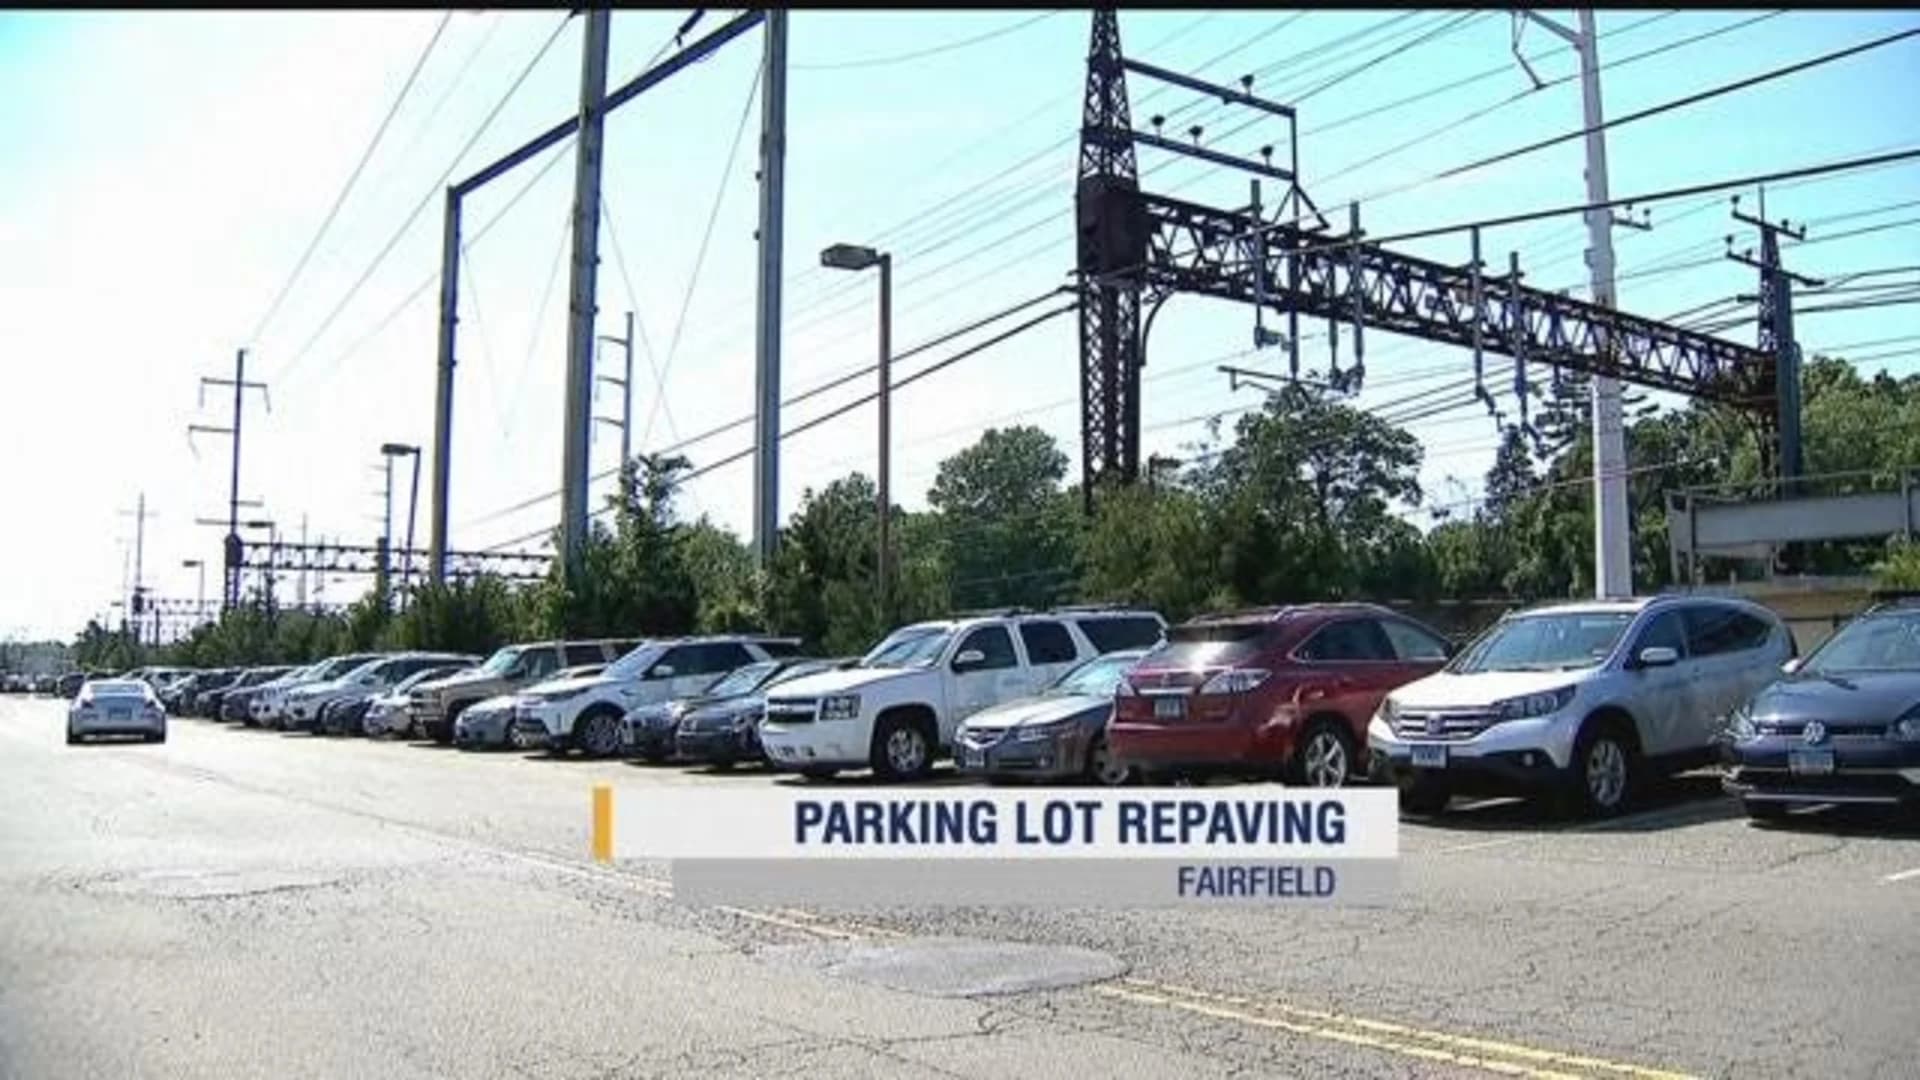 No daily parking available at Fairfield Center train station next month